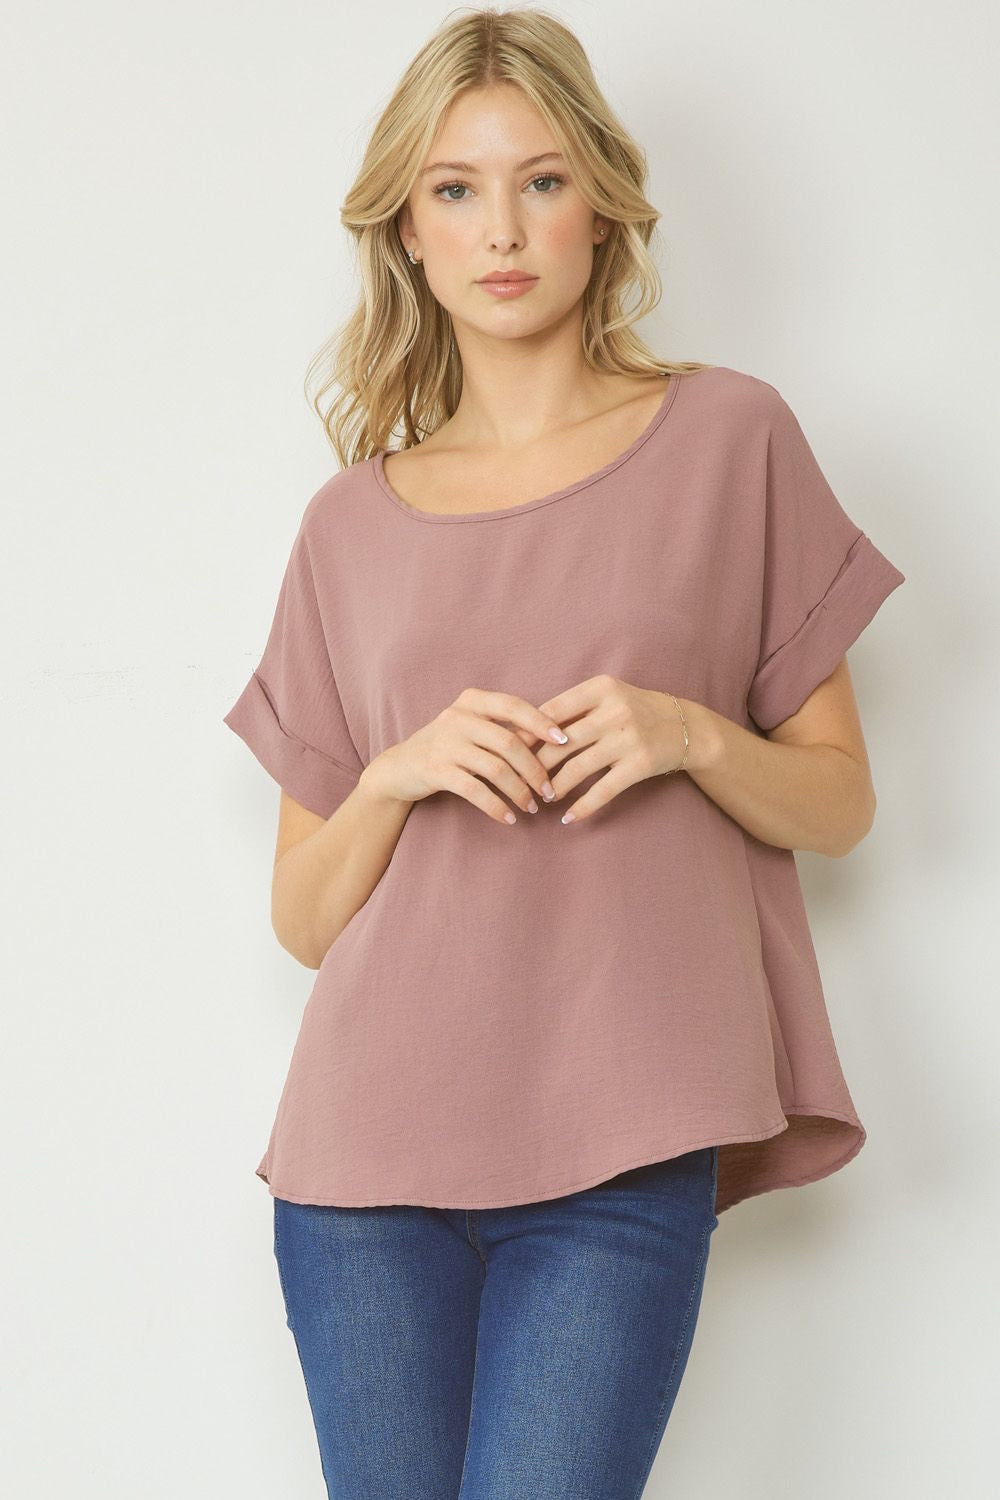 Mocha scoop-neck top featuring permanent rolled sleeve detail and an asymmetrical hem.